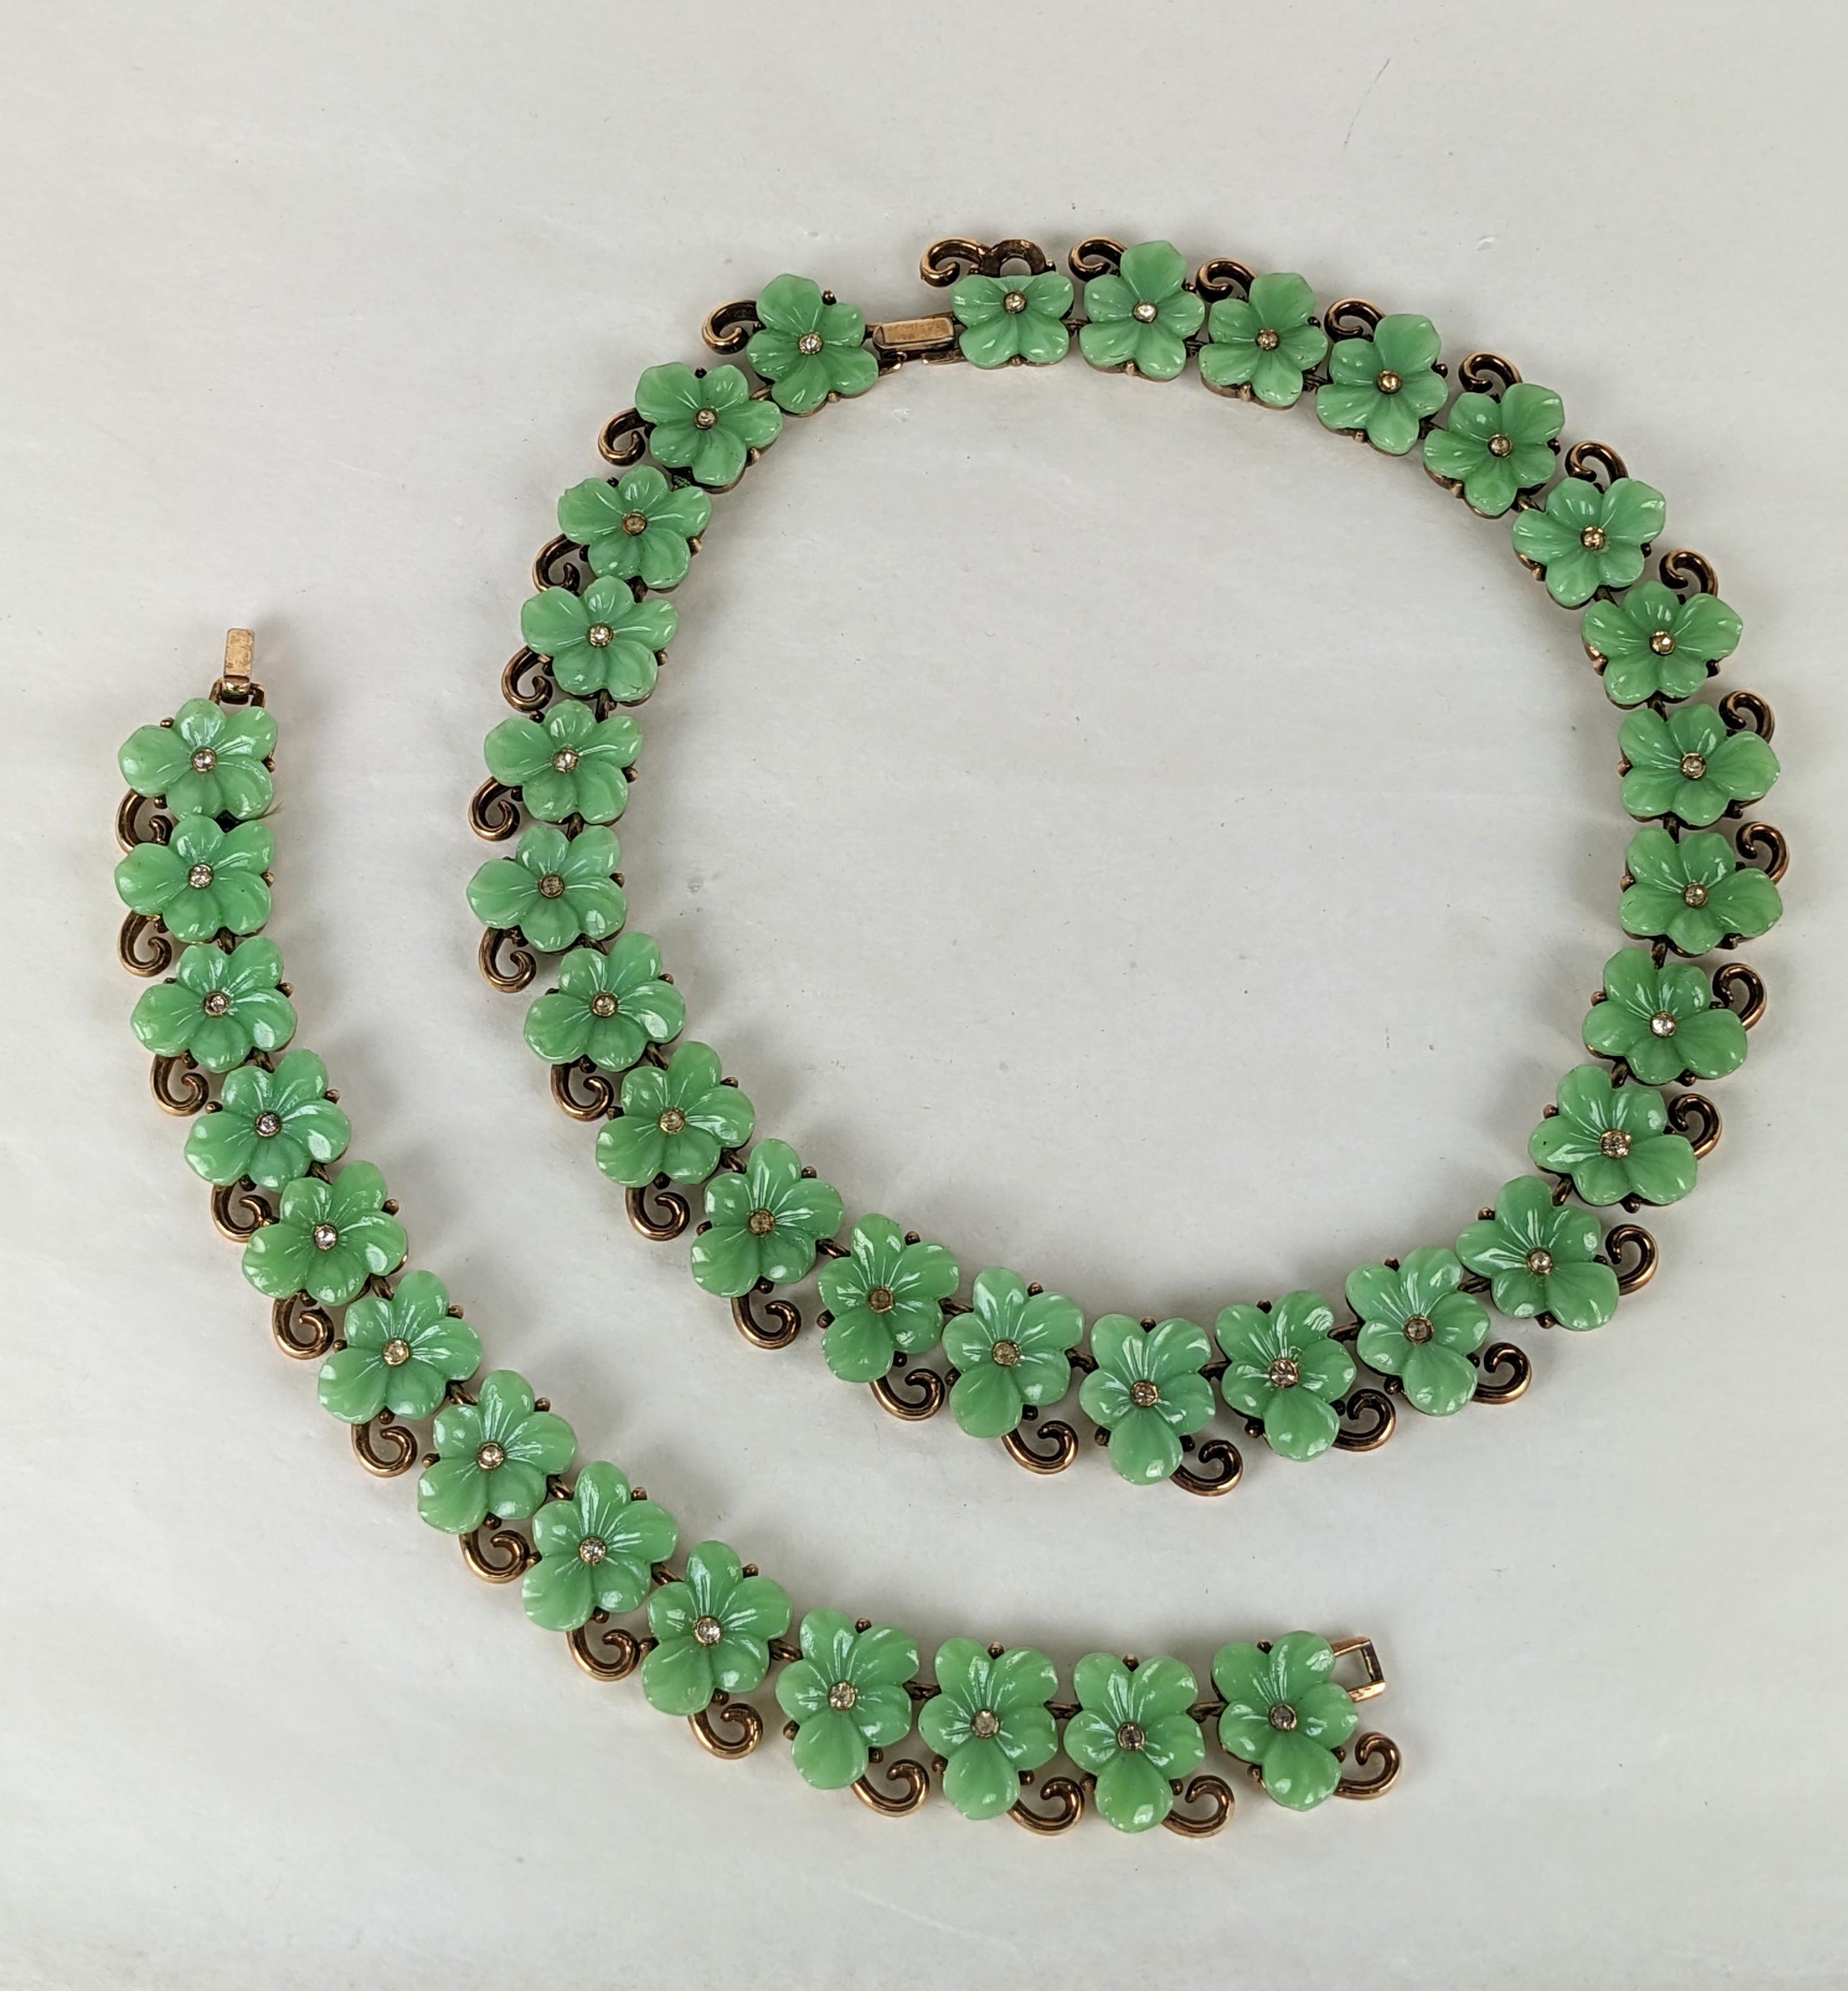 Charming Trifari Jade Pansy Suite from the 1940's set in rose gold plate with molded glass pansies and tiny pastes. Matching bracelet with flexible link pieces. Signed. 1940's USA. Necklace 15